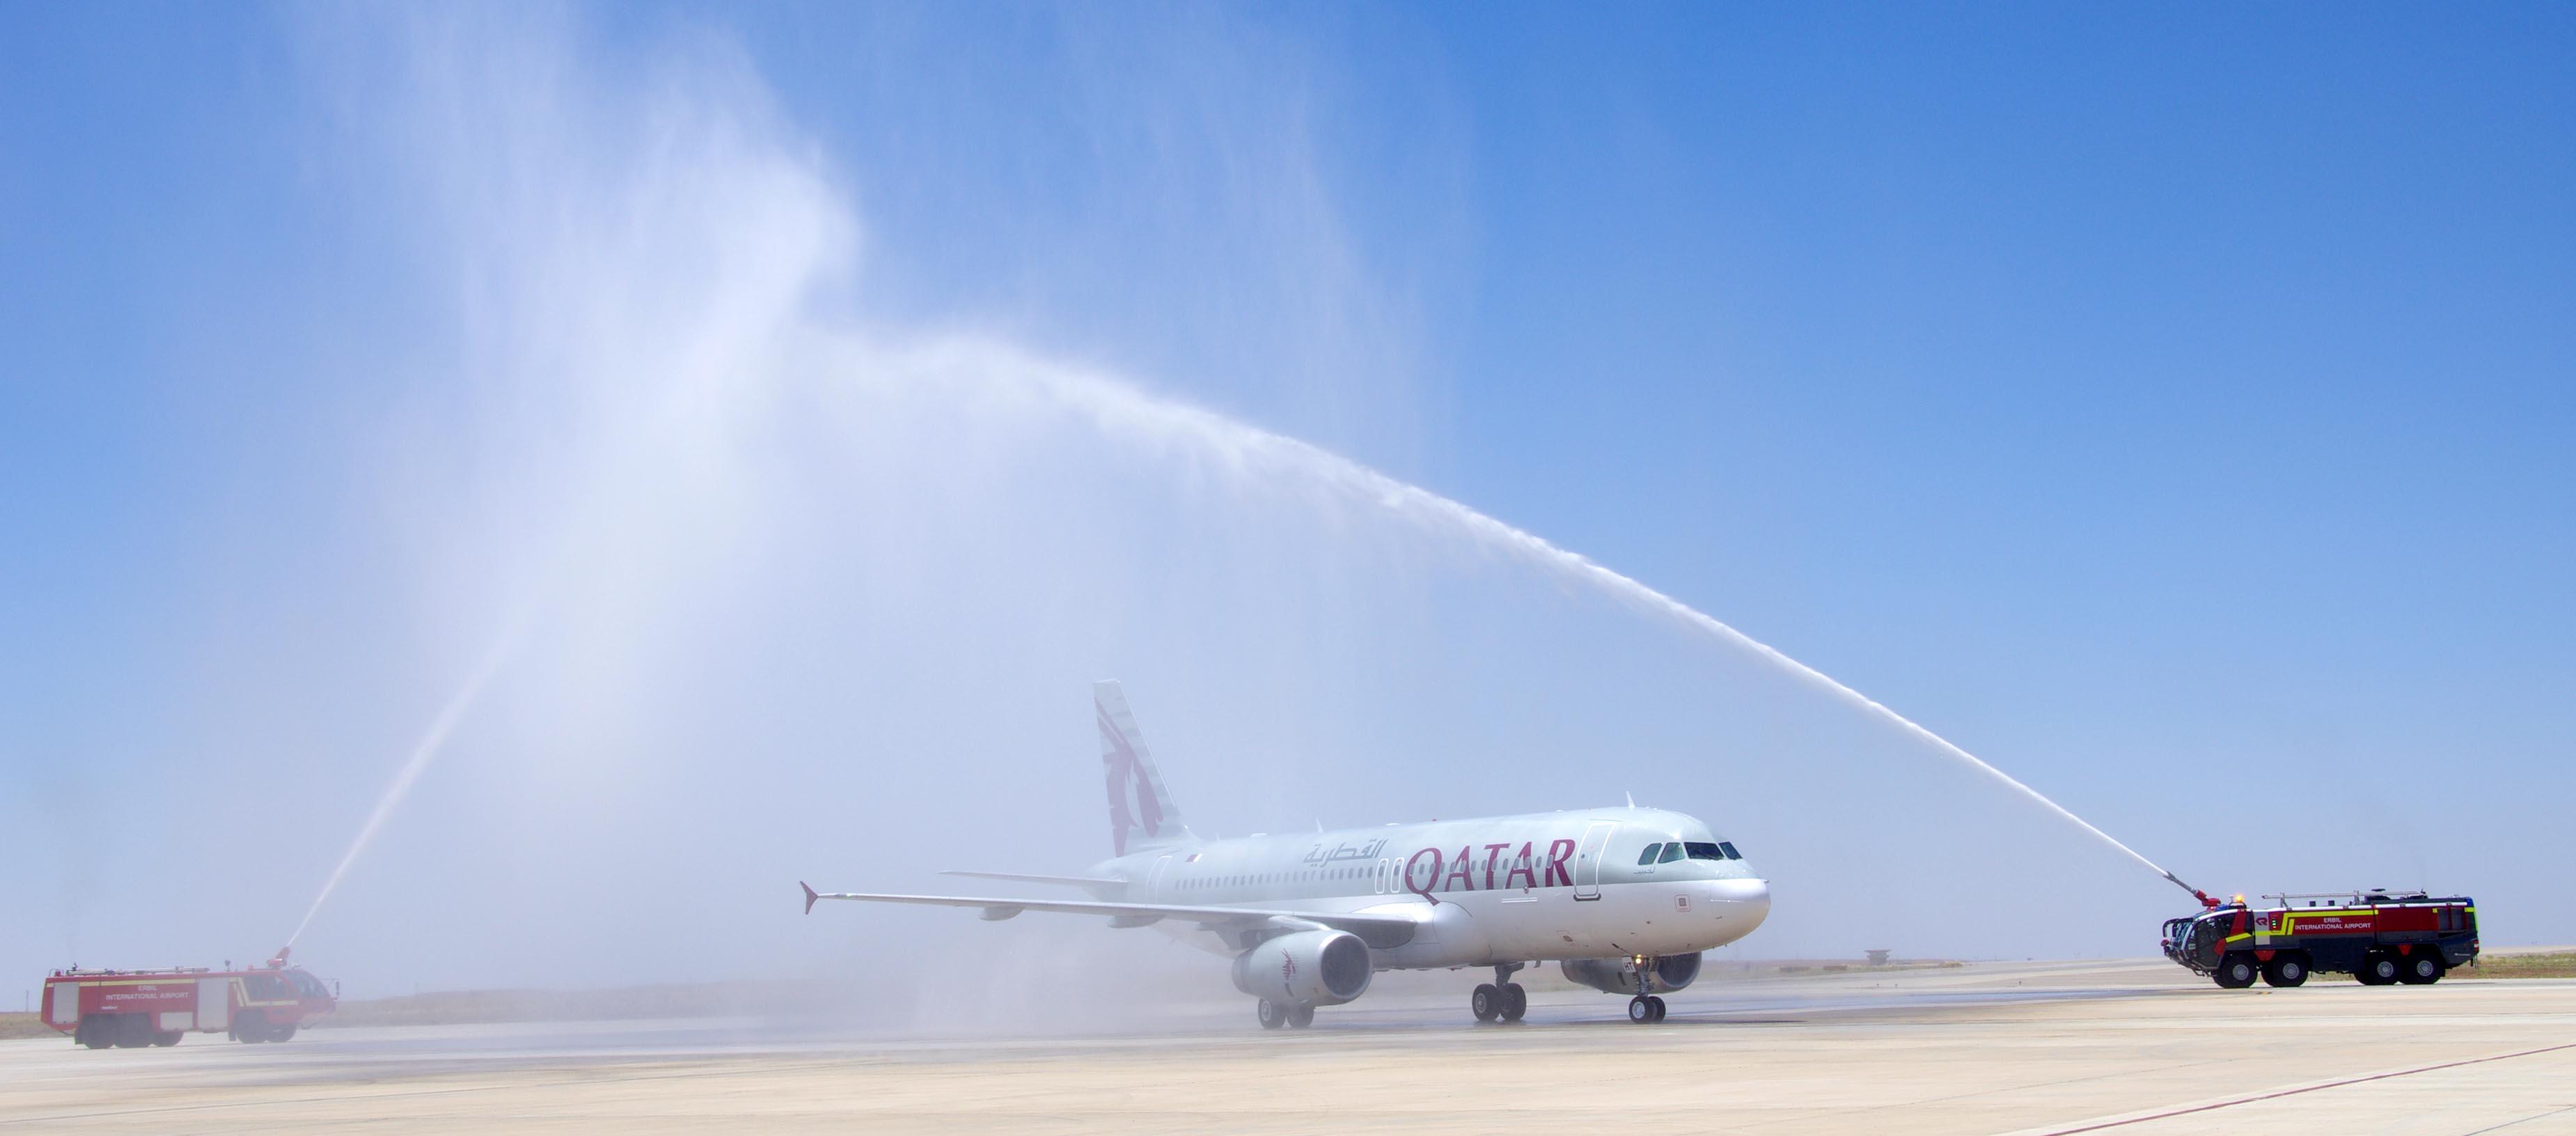 Qatar Airways Has Extended Its Middle East Footprint To Iraq